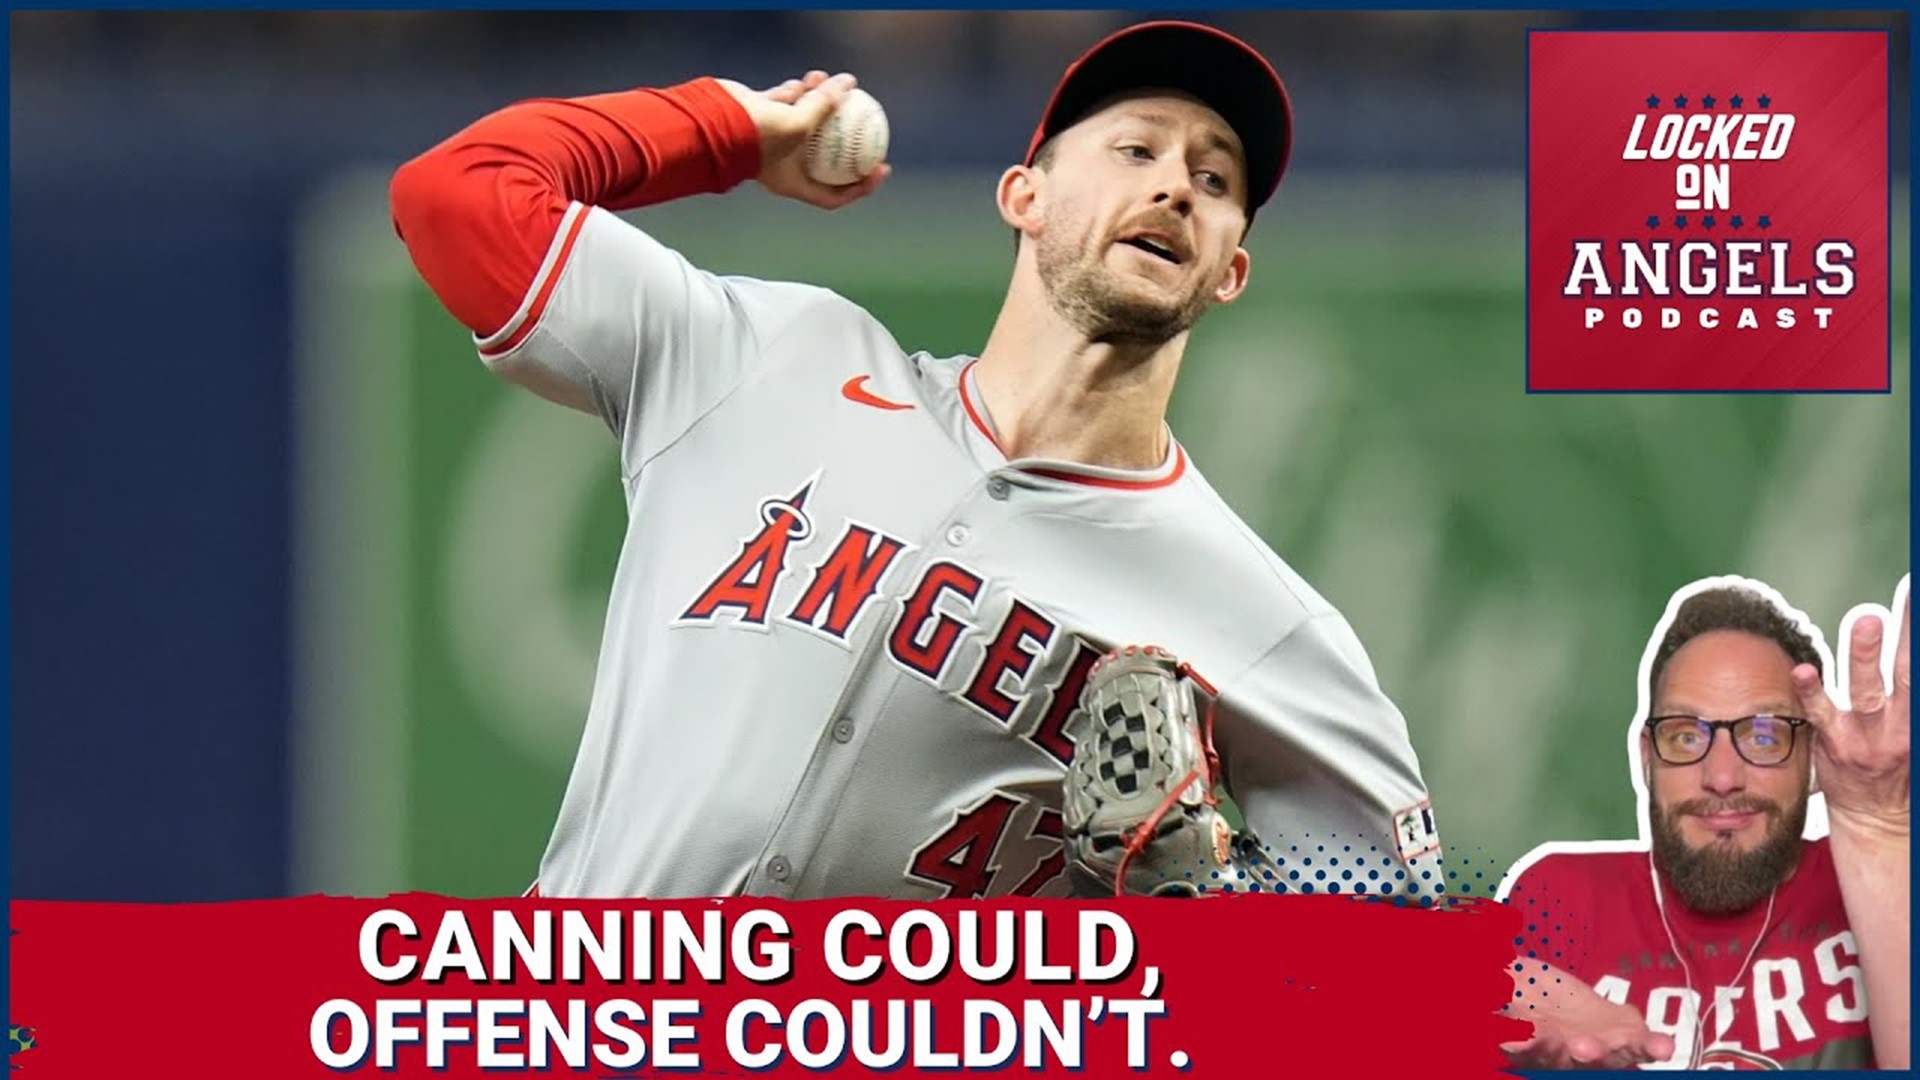 The Los Angeles Angels end up splitting a 4-game set with the Rays, while Griffin Canning pitched well, but Halos' offense was quiet.